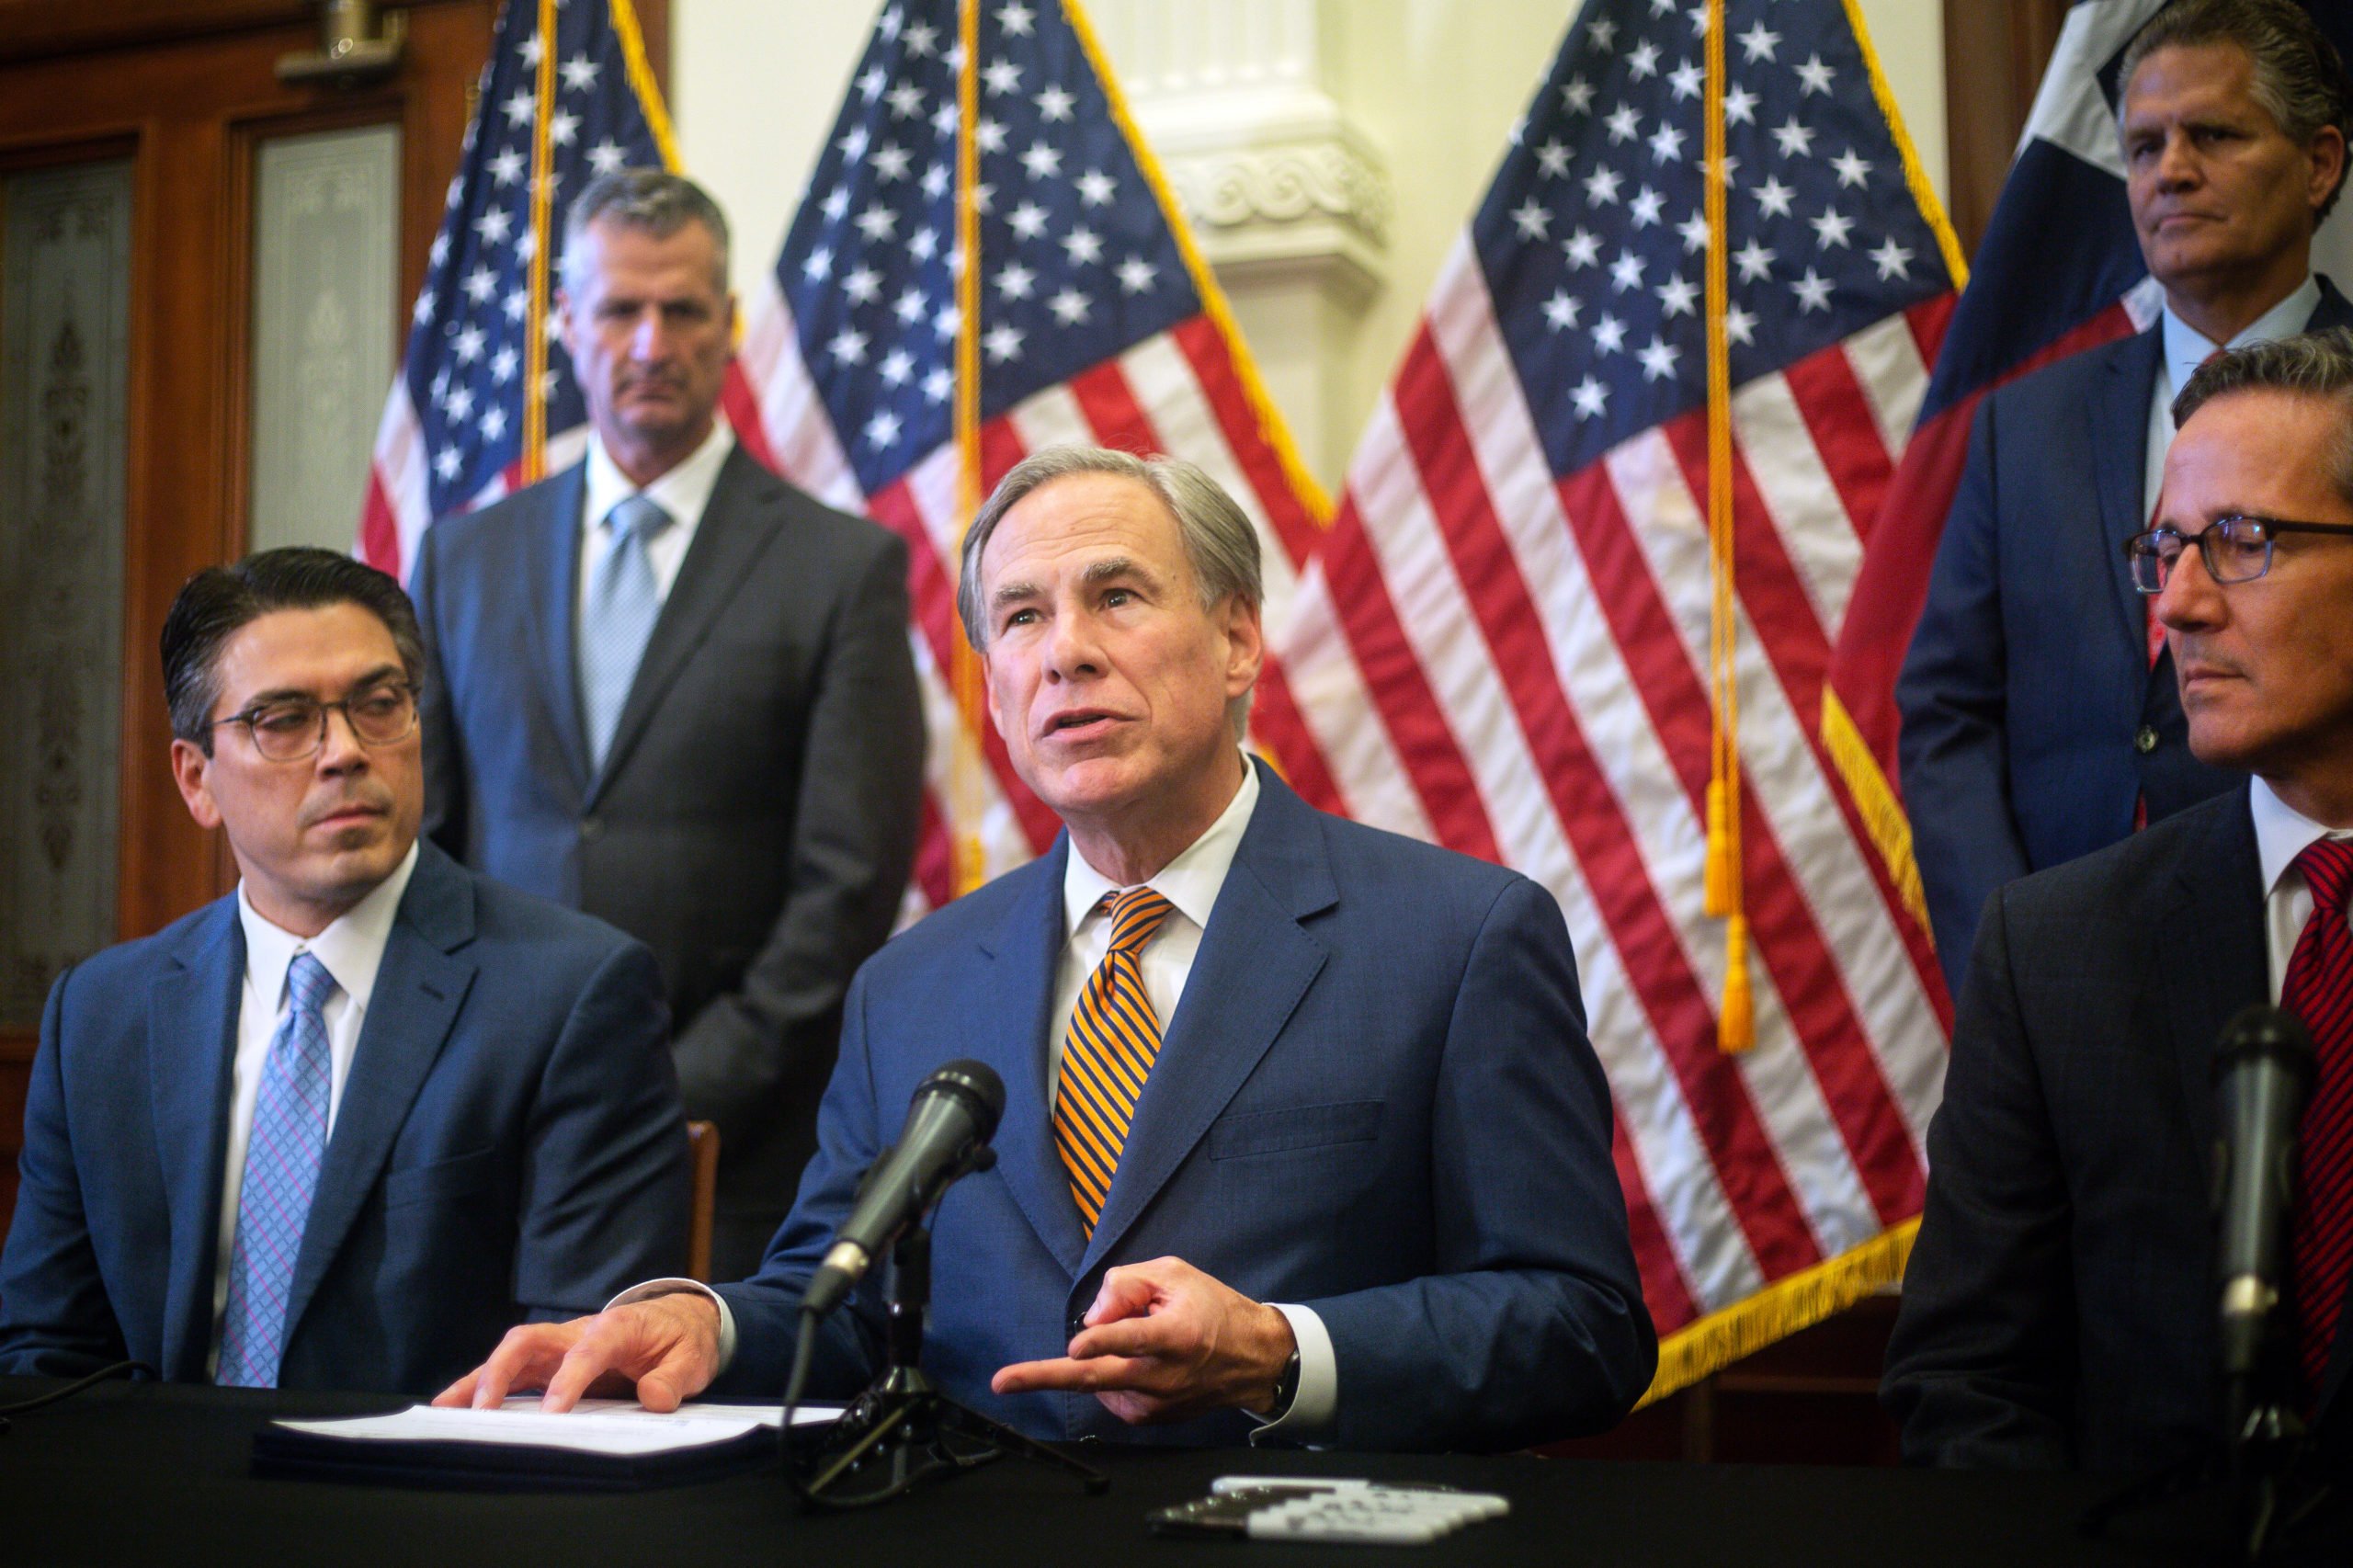 Texas Governor Greg Abbott and State Senator Kelly Hancock attend a press conference where Abbott signed Senate Bills 2 and 3. (Photo by Montinique Monroe/Getty Images)